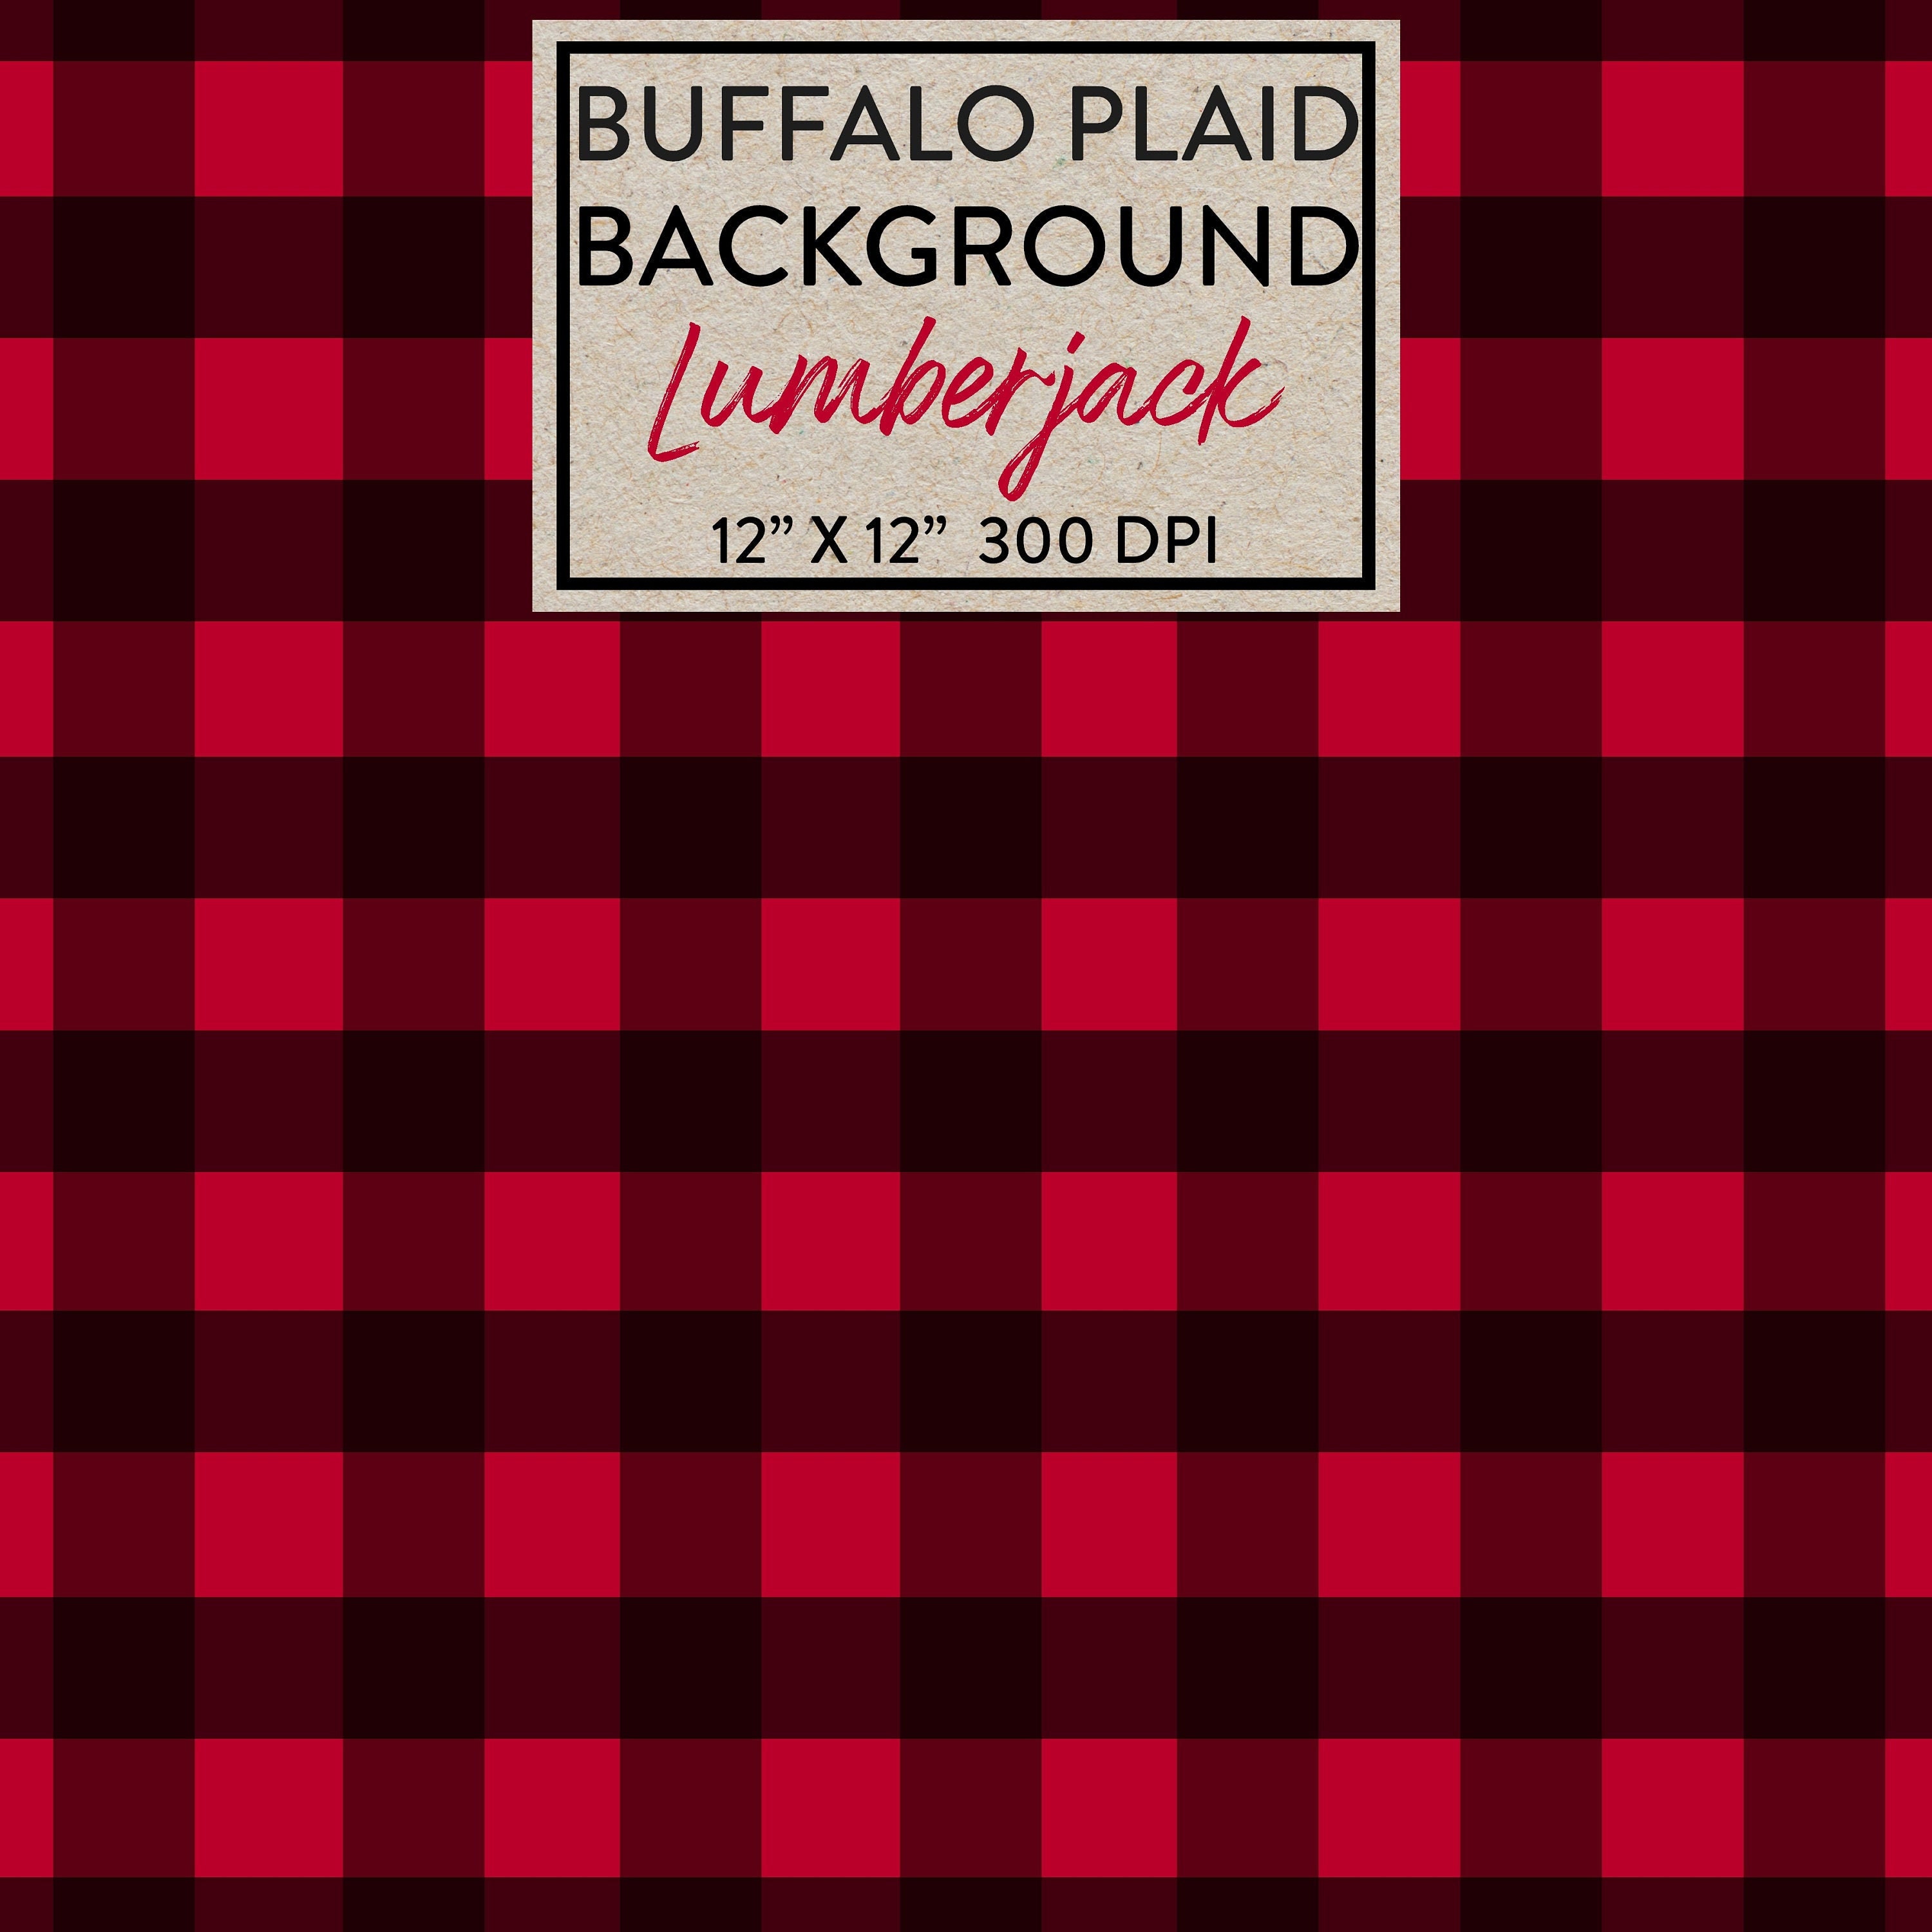 SMALL RED BUFFALO Plaid Faux Leather Sheets, Red and Black, Printed Faux  Leather, Vinyl Fabric Sheet 